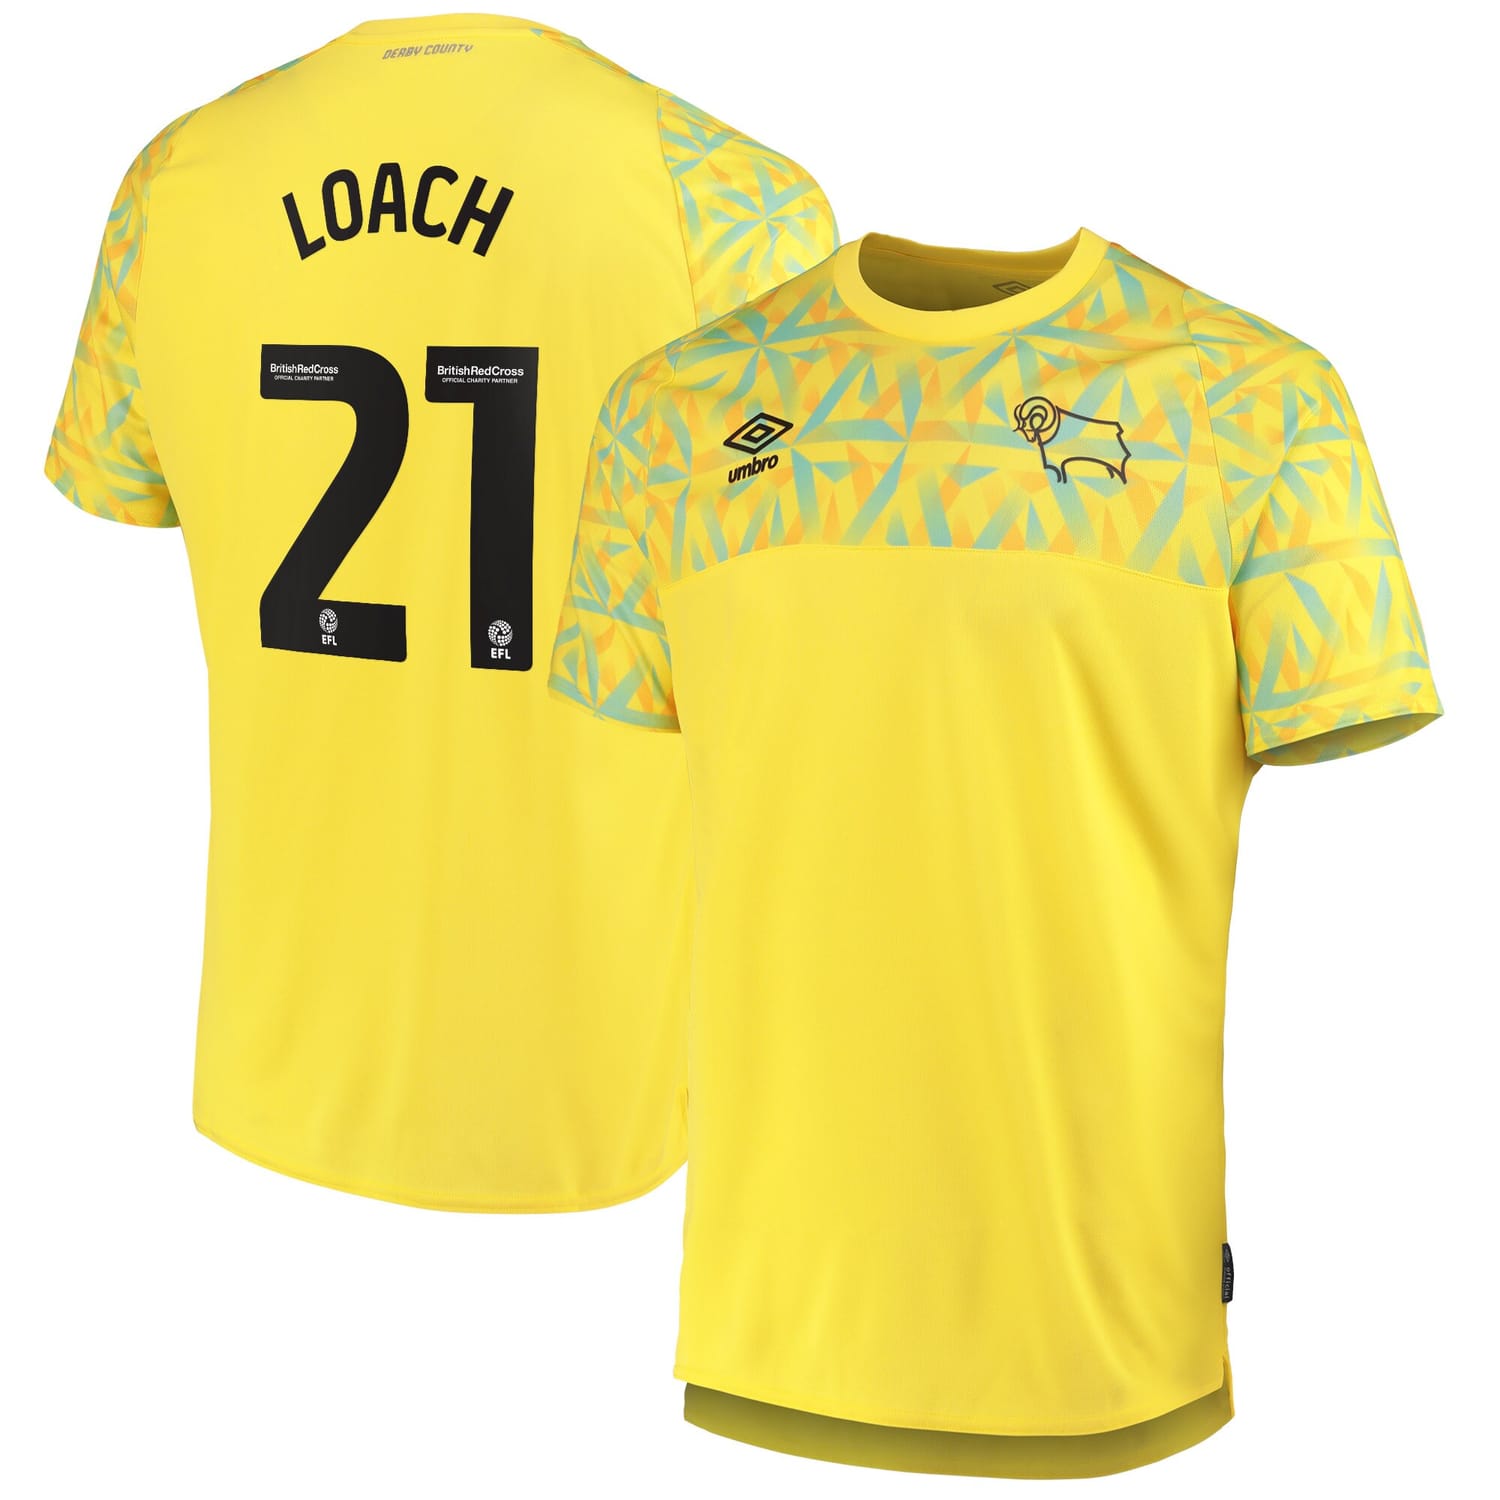 EFL League One Derby County Away Goalkeeper Jersey Shirt 2022-23 player Loach 21 printing for Men